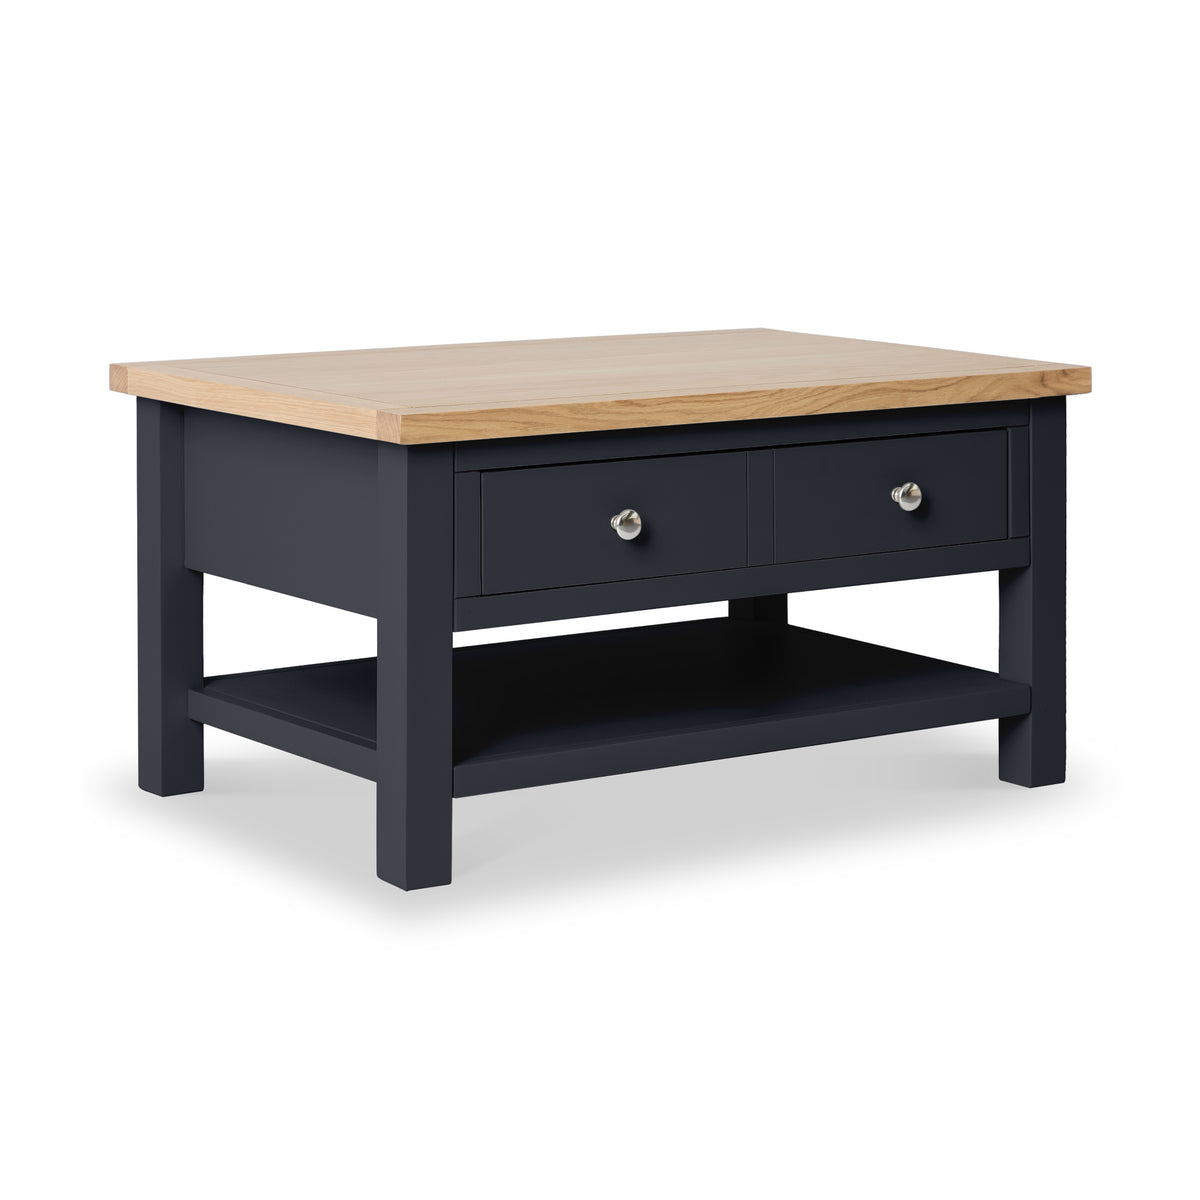 Farrow Black Coffee Table from Roseland Furniture